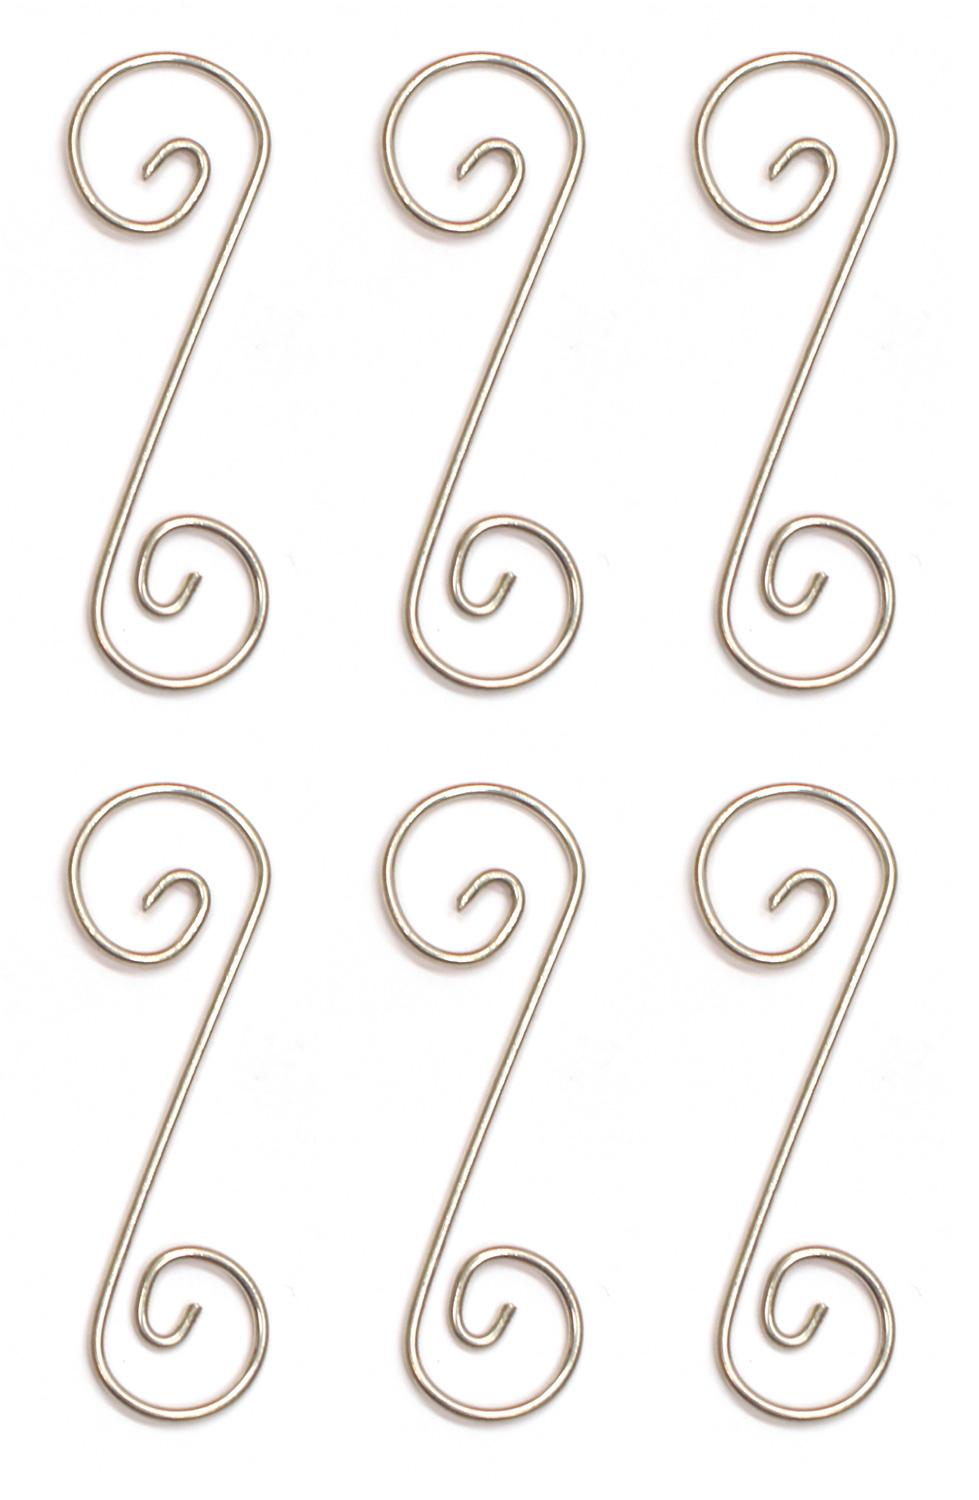 3" Pre-Tinned Curly Q Hangers Q6, 6 Pack